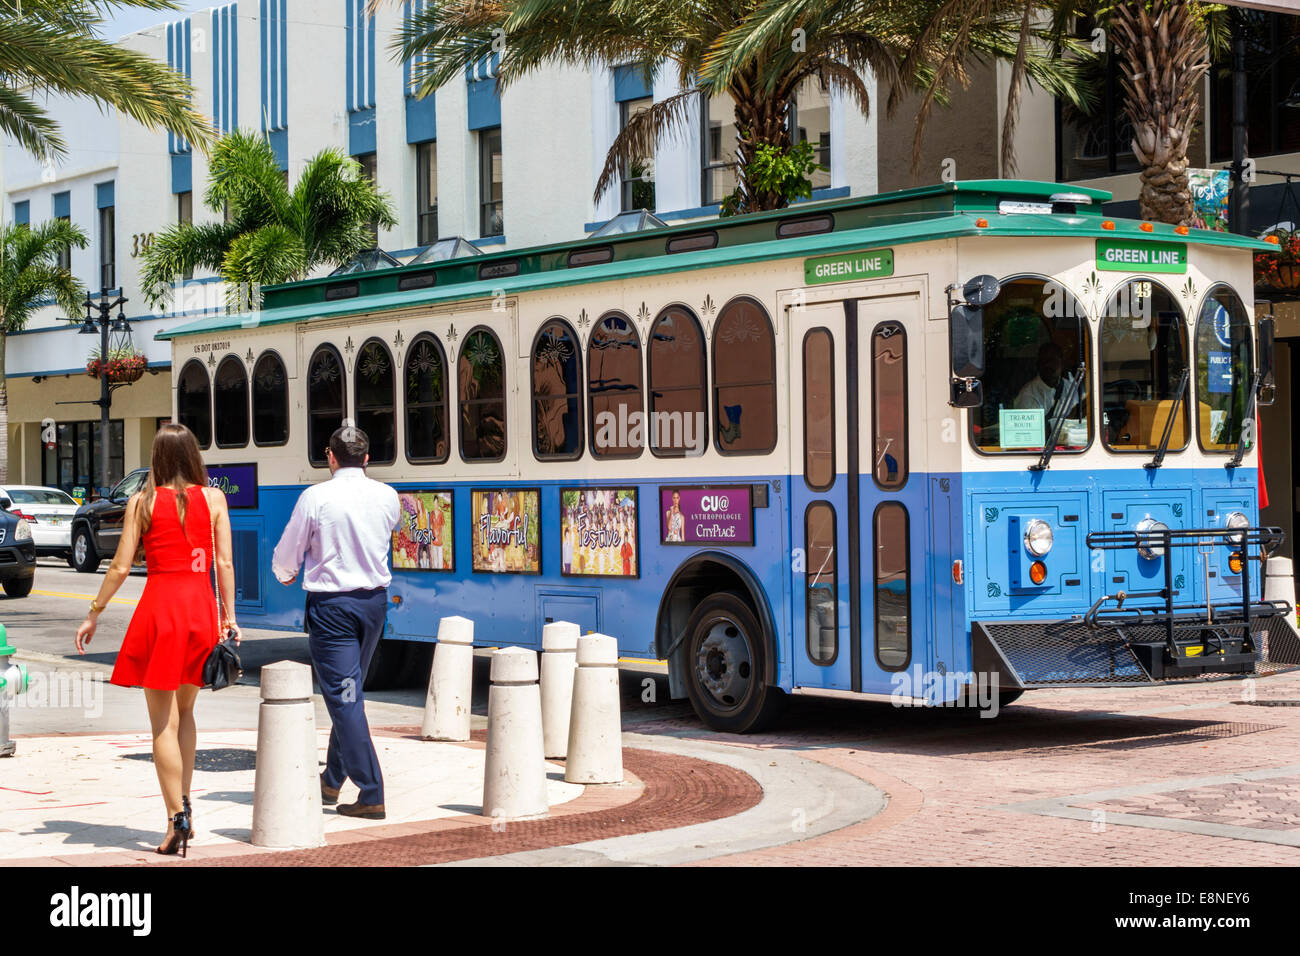 West Palm Beach Florida,Clematis Street,downtown,WPB Downtown Trolley,Green Line,public transportation,banner,district,adult adults man men male,woman Stock Photo